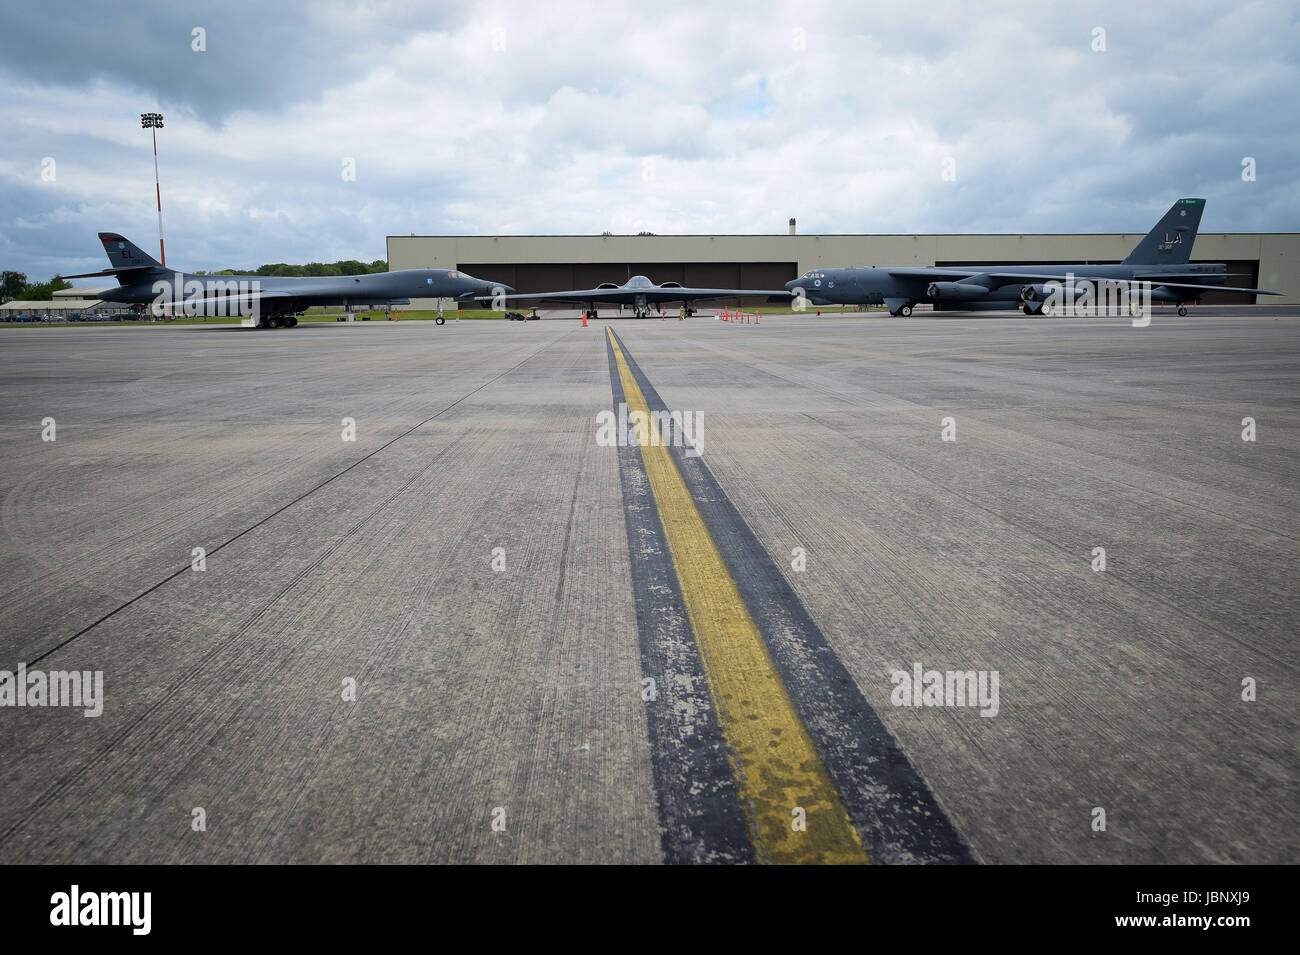 A USAF B-2 Spirit bomber, centre, B-1B Lancer, left and a B-52 Stratofortress, right, on the pan at RAF Fairford. Stock Photo